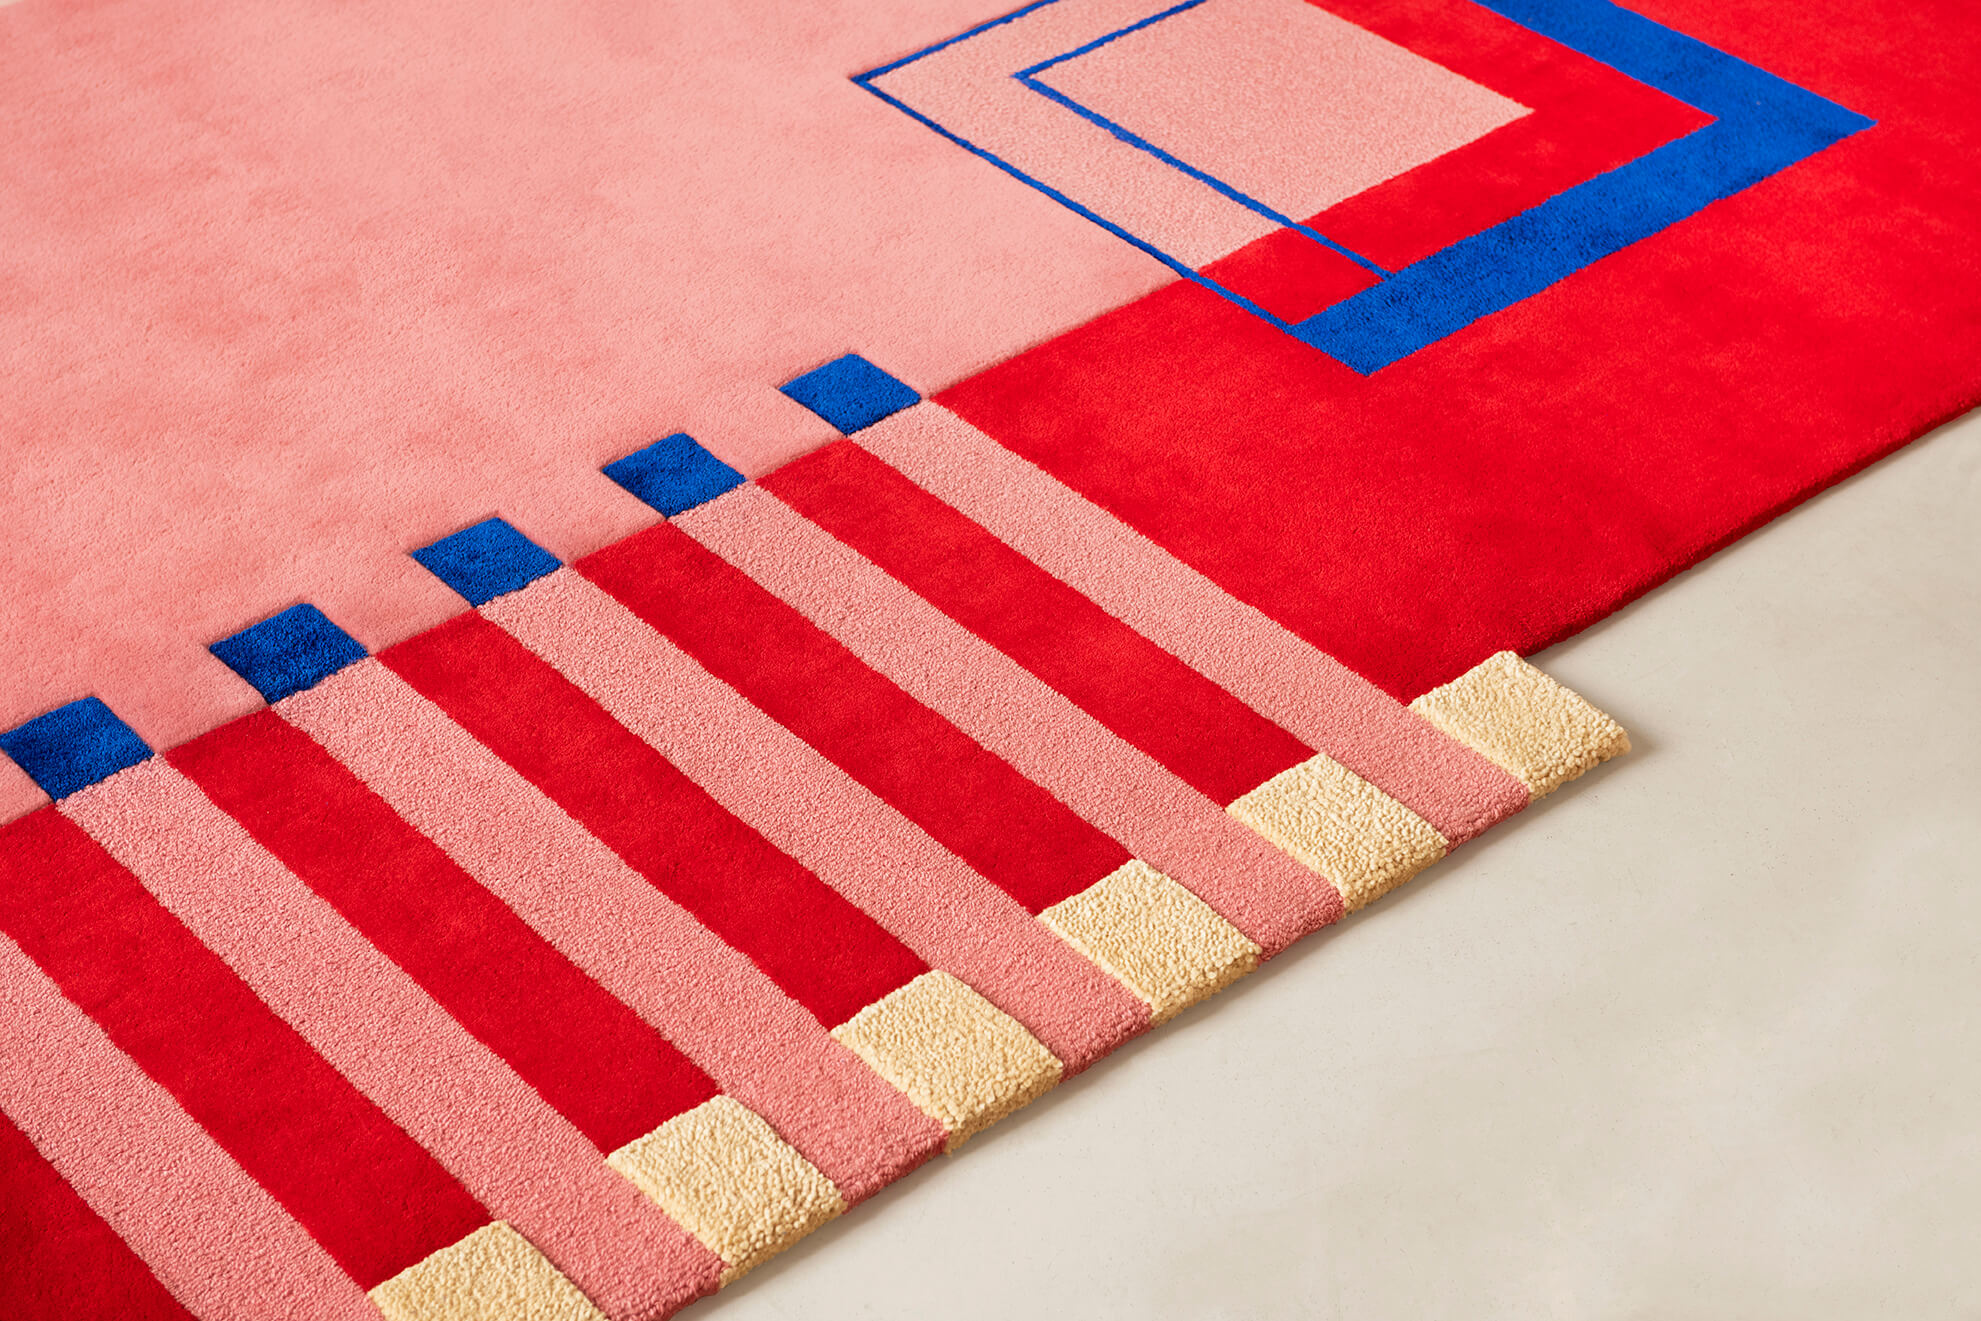 Image Crafting Perfection: A Bespoke Carpet for the ‘Sunset Apartment’ by Aurélie Penneman Interior Design in Knokke-Zoute